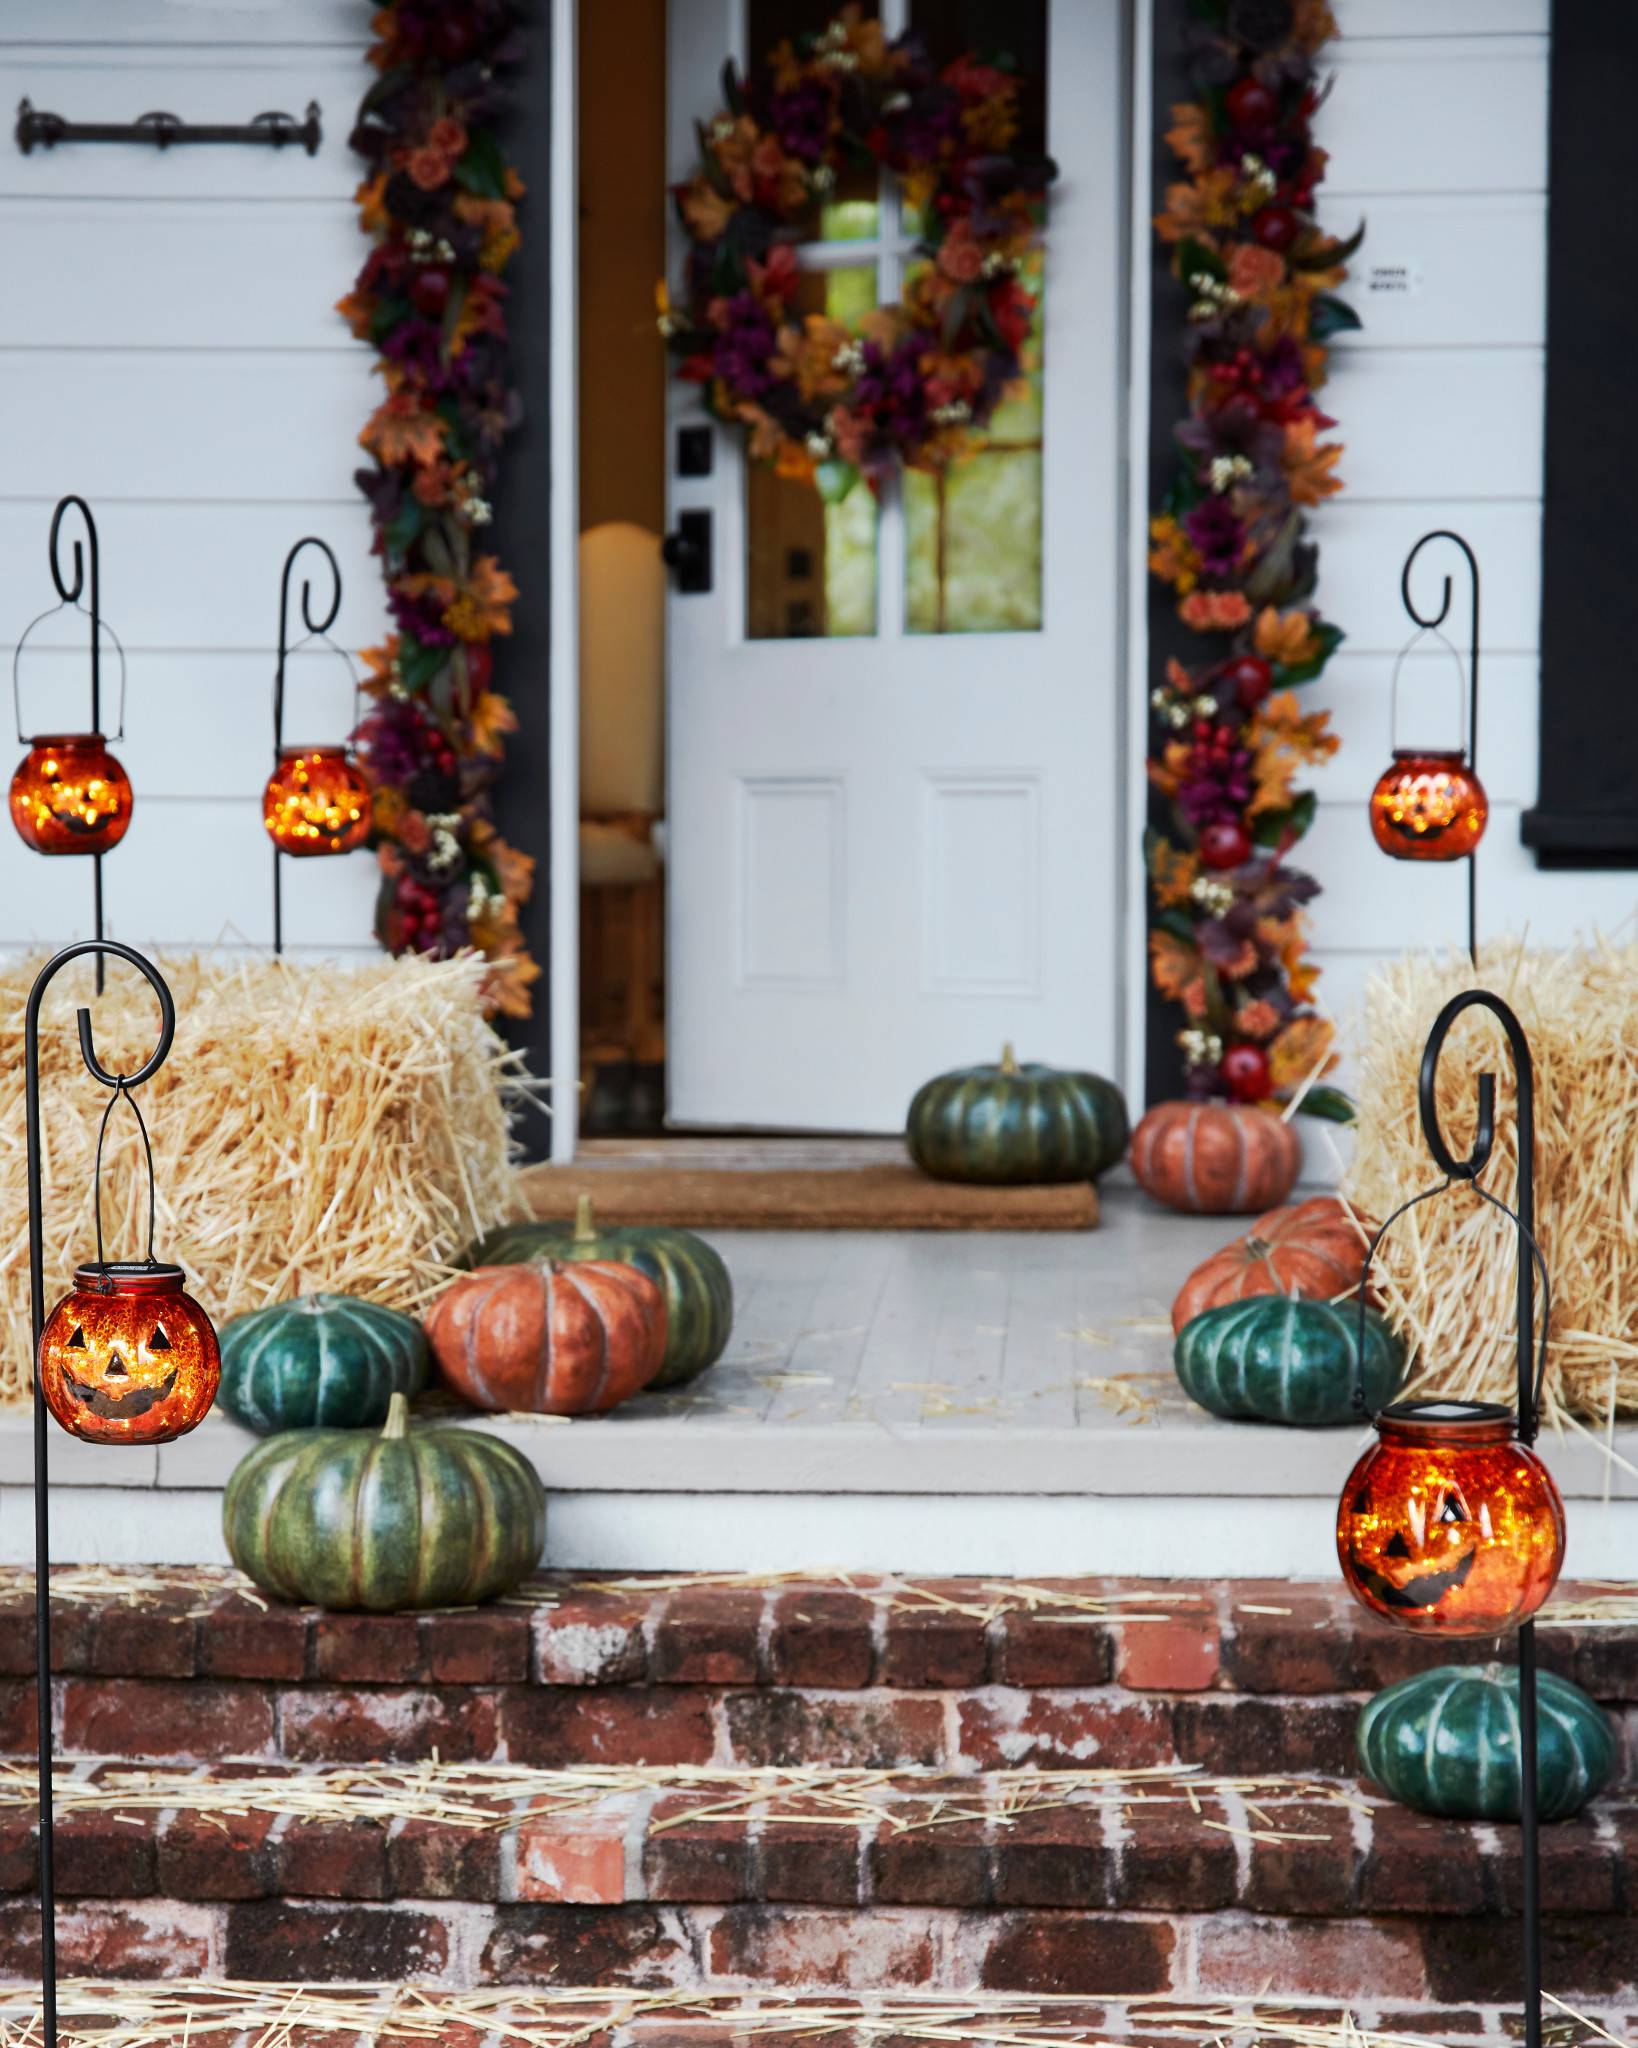 6 Fall Decorating Ideas for Your Porch and Outdoor Spaces